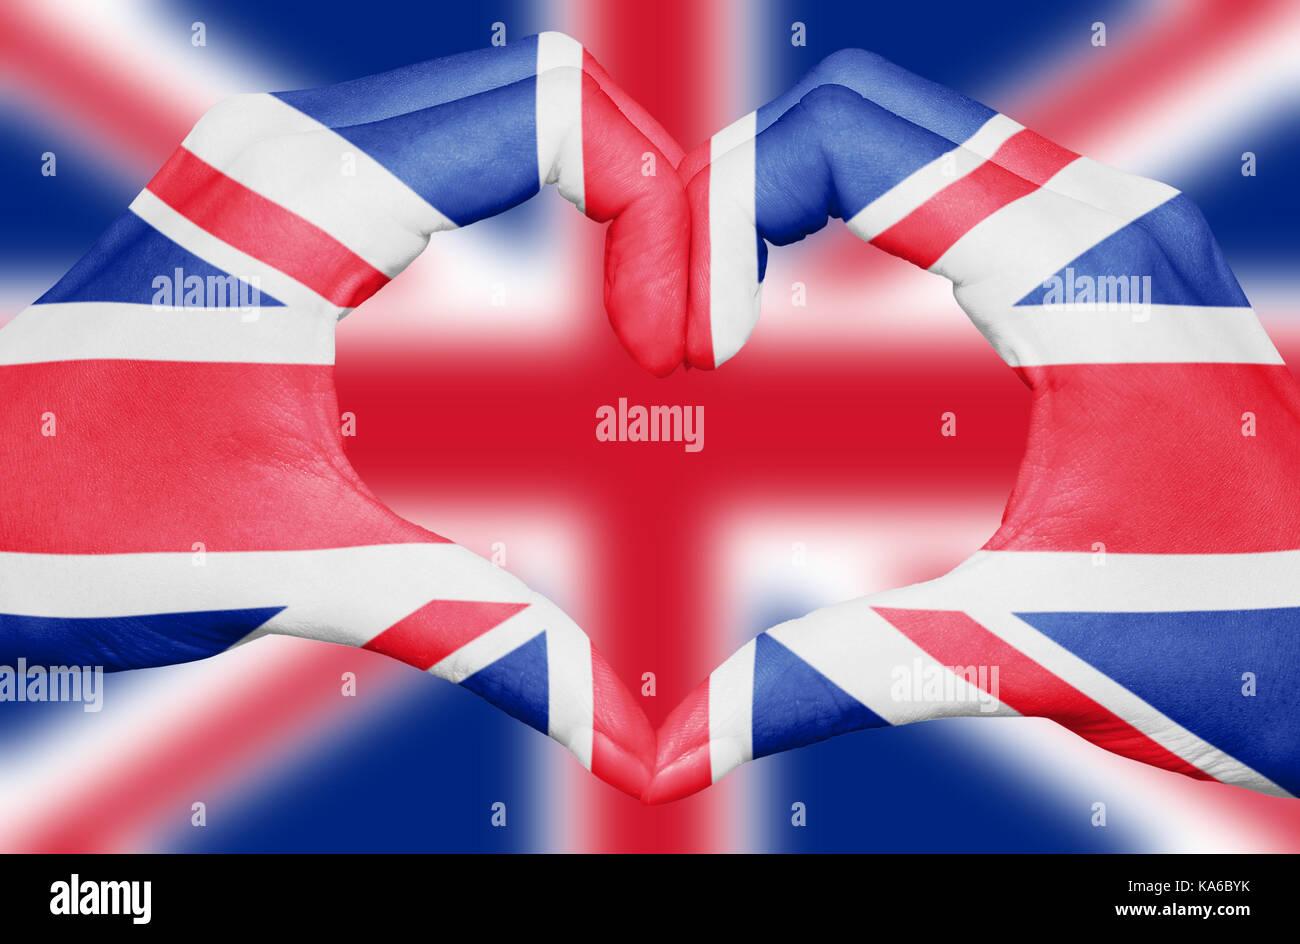 United kingdom flag painted on hands forming a heart isolated on blurred Union Jack background, UK national and patriotism concept Stock Photo